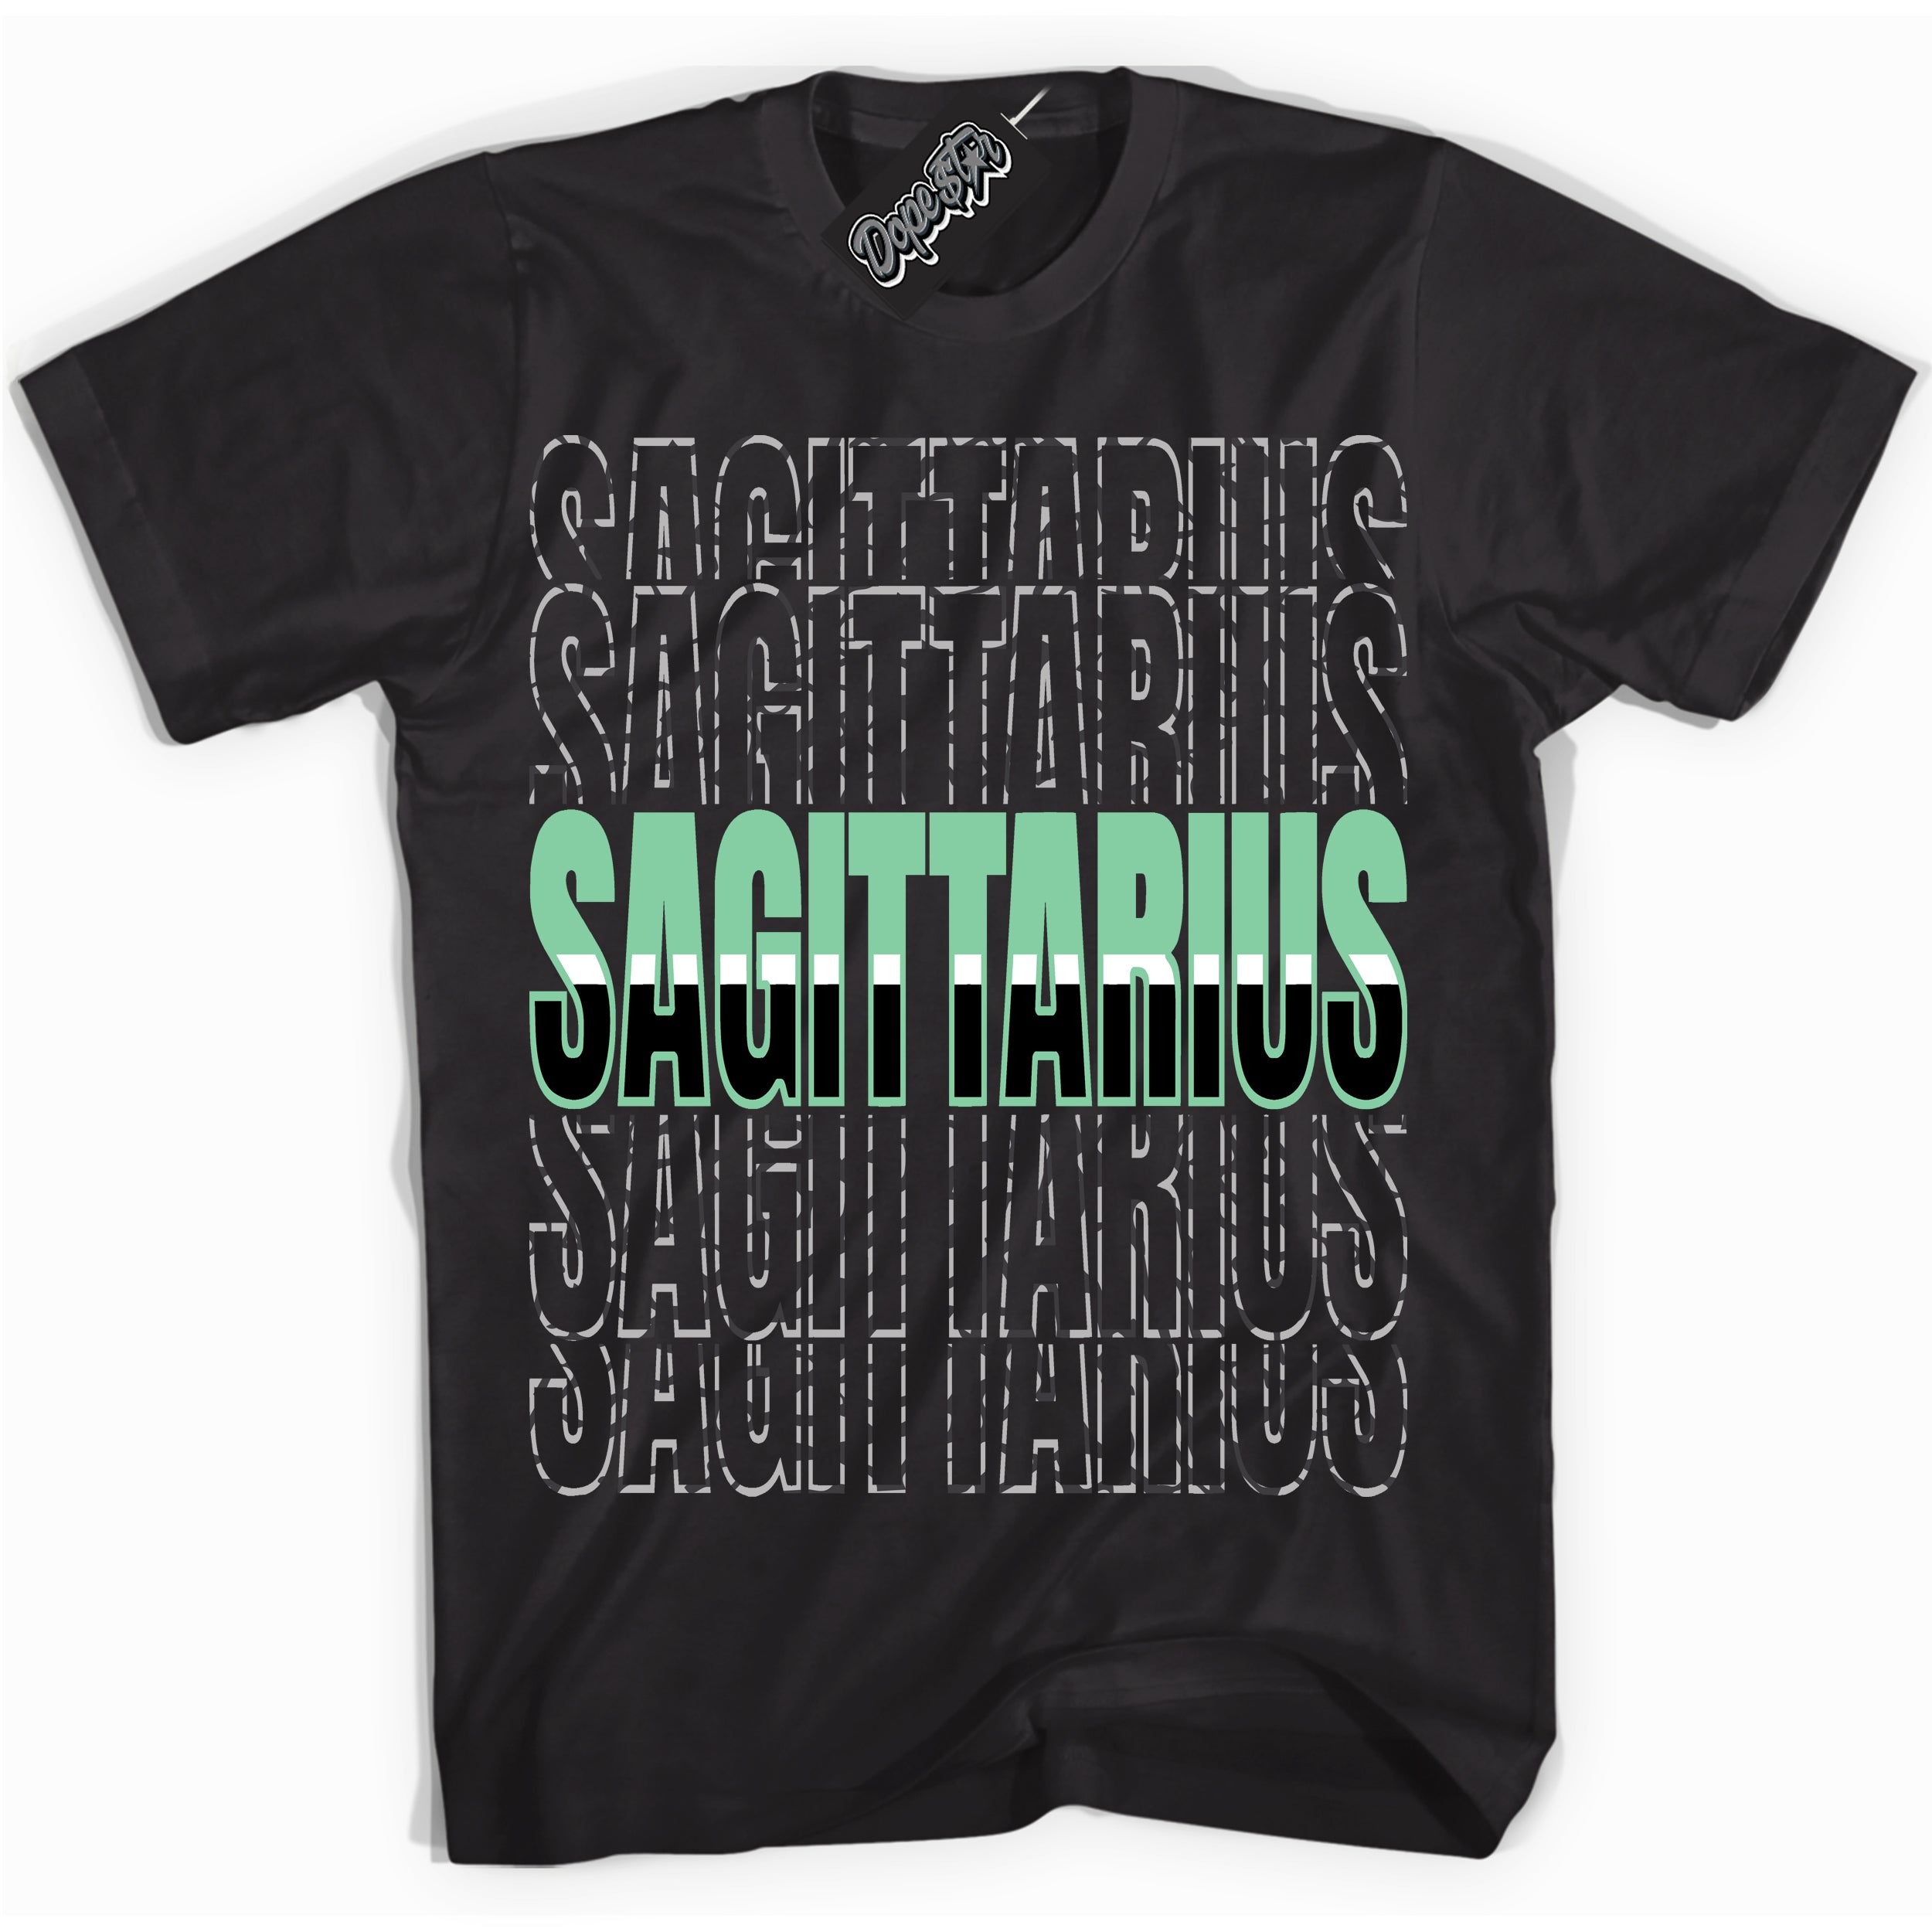 Cool Black graphic tee with “ Sagittarius ” design, that perfectly matches Green Glow 3s sneakers 